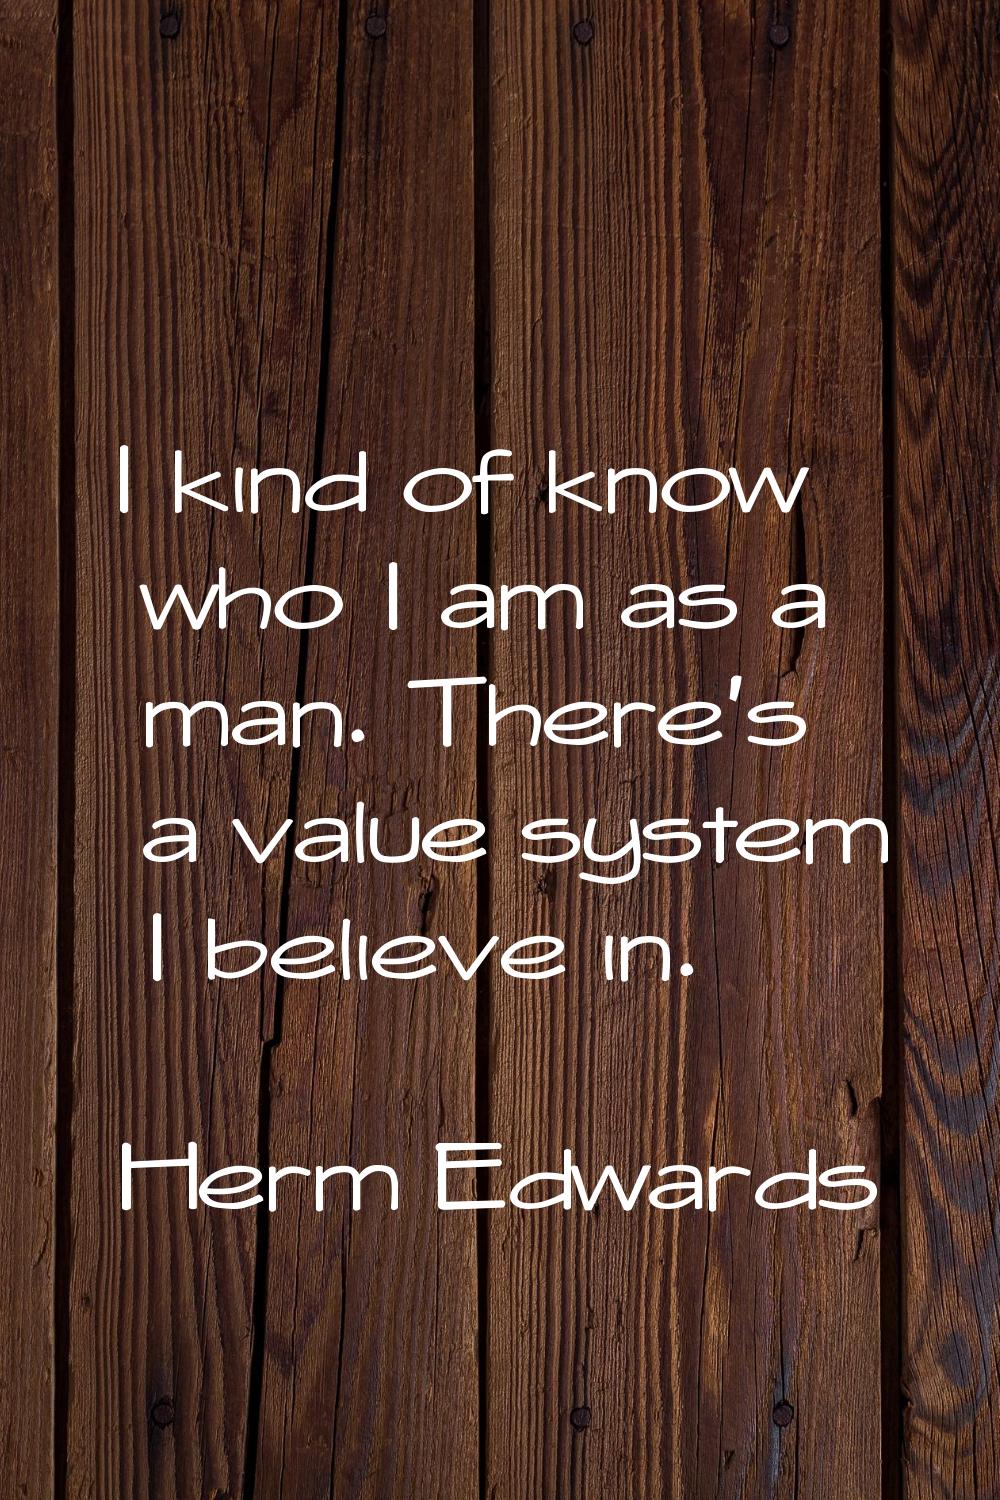 I kind of know who I am as a man. There's a value system I believe in.